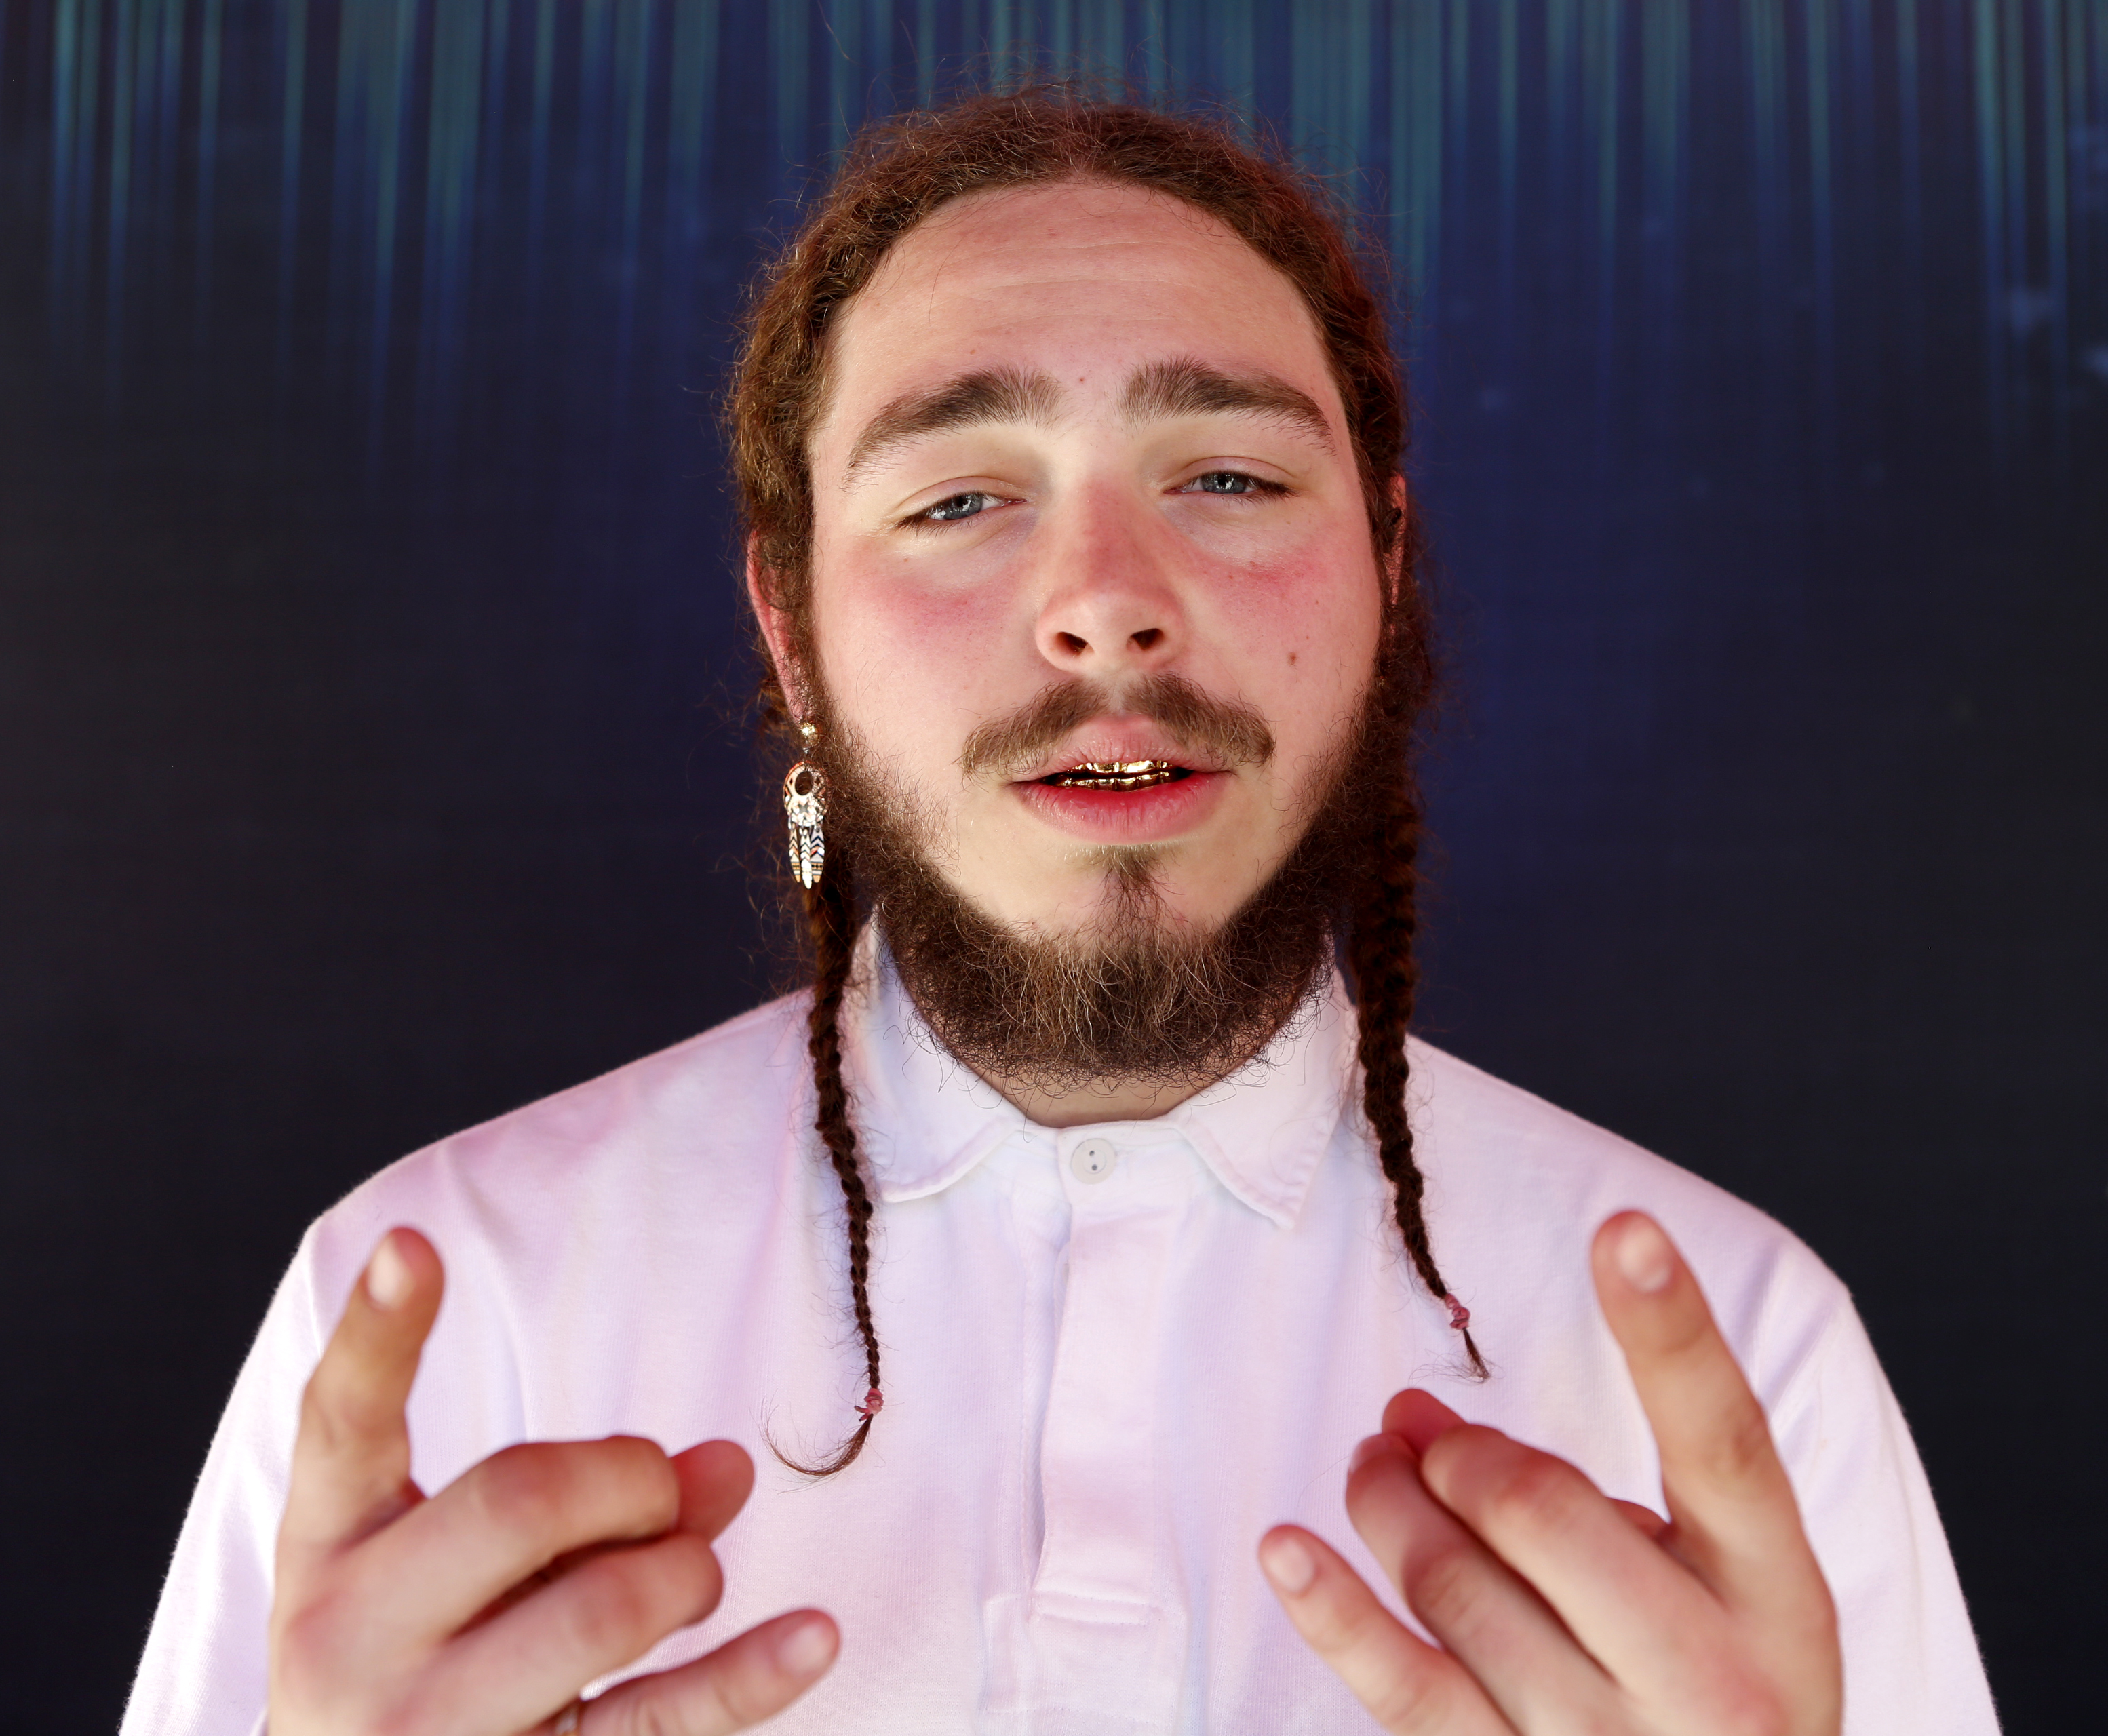 6 years ago today, Post Malone released 'Rockstar' feat 21 savage ⚡ The  song reached #1 on Billboard Hot 100 (8 weeks), hit 2.7 billion streams on  Spotify , 1,1 billion views